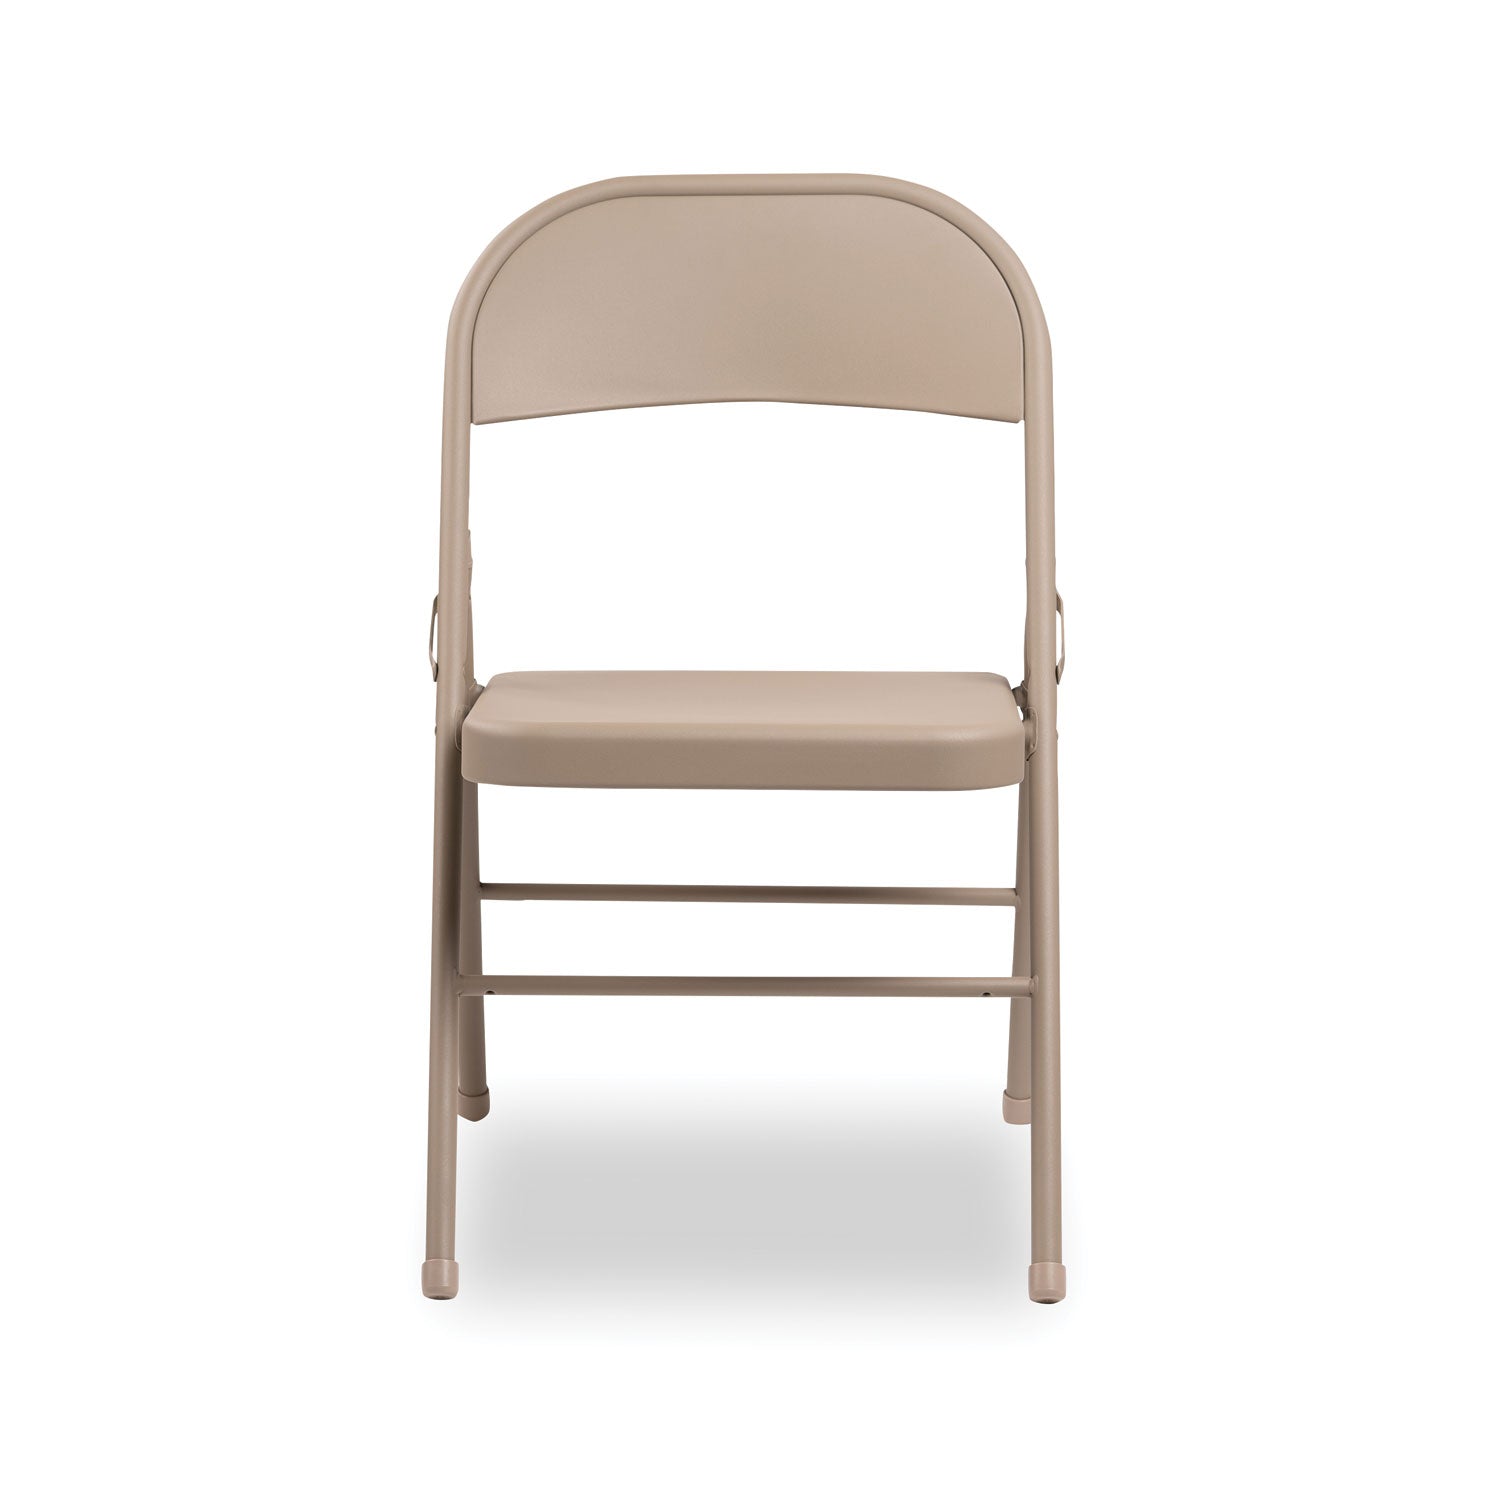 all-steel-folding-chair-supports-up-to-300-lb-165-seat-height-tan-seat-tan-back-tan-base-4-carton_alefcmt4t - 5